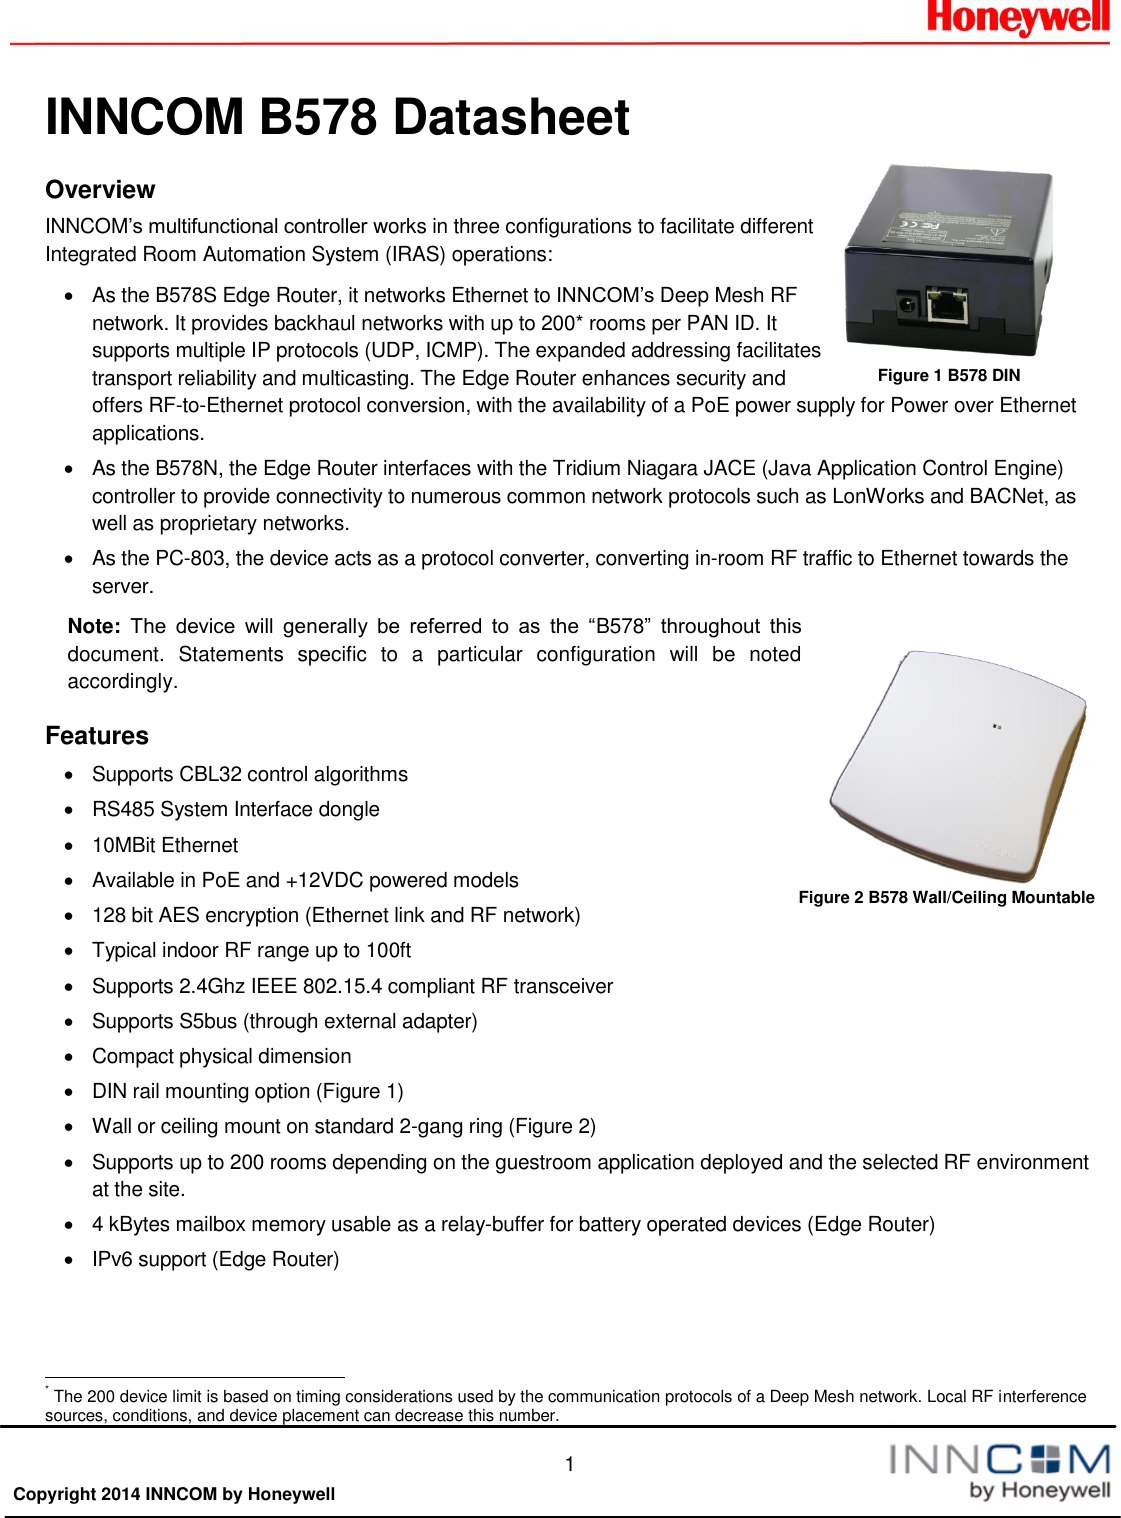  1  Copyright 2014 INNCOM by HoneywellINNCOM B578 Datasheet Overview INNCOM’s multifunctional controller works in three configurations to facilitate different Integrated Room Automation System (IRAS) operations:   As the B578S Edge Router, it networks Ethernet to INNCOM’s Deep Mesh RF network. It provides backhaul networks with up to 200* rooms per PAN ID. It supports multiple IP protocols (UDP, ICMP). The expanded addressing facilitates transport reliability and multicasting. The Edge Router enhances security and offers RF-to-Ethernet protocol conversion, with the availability of a PoE power supply for Power over Ethernet applications.    As the B578N, the Edge Router interfaces with the Tridium Niagara JACE (Java Application Control Engine) controller to provide connectivity to numerous common network protocols such as LonWorks and BACNet, as well as proprietary networks.   As the PC-803, the device acts as a protocol converter, converting in-room RF traffic to Ethernet towards the server.  Note: The  device  will  generally  be  referred  to  as  the  “B578”  throughout  this document.  Statements  specific  to  a  particular  configuration  will  be  noted accordingly. Features   Supports CBL32 control algorithms   RS485 System Interface dongle   10MBit Ethernet   Available in PoE and +12VDC powered models   128 bit AES encryption (Ethernet link and RF network)   Typical indoor RF range up to 100ft   Supports 2.4Ghz IEEE 802.15.4 compliant RF transceiver   Supports S5bus (through external adapter)   Compact physical dimension   DIN rail mounting option (Figure 1)   Wall or ceiling mount on standard 2-gang ring (Figure 2)   Supports up to 200 rooms depending on the guestroom application deployed and the selected RF environment at the site.    4 kBytes mailbox memory usable as a relay-buffer for battery operated devices (Edge Router)   IPv6 support (Edge Router)                                                       * The 200 device limit is based on timing considerations used by the communication protocols of a Deep Mesh network. Local RF interference sources, conditions, and device placement can decrease this number. Figure 2 B578 Wall/Ceiling Mountable Figure 1 B578 DIN 